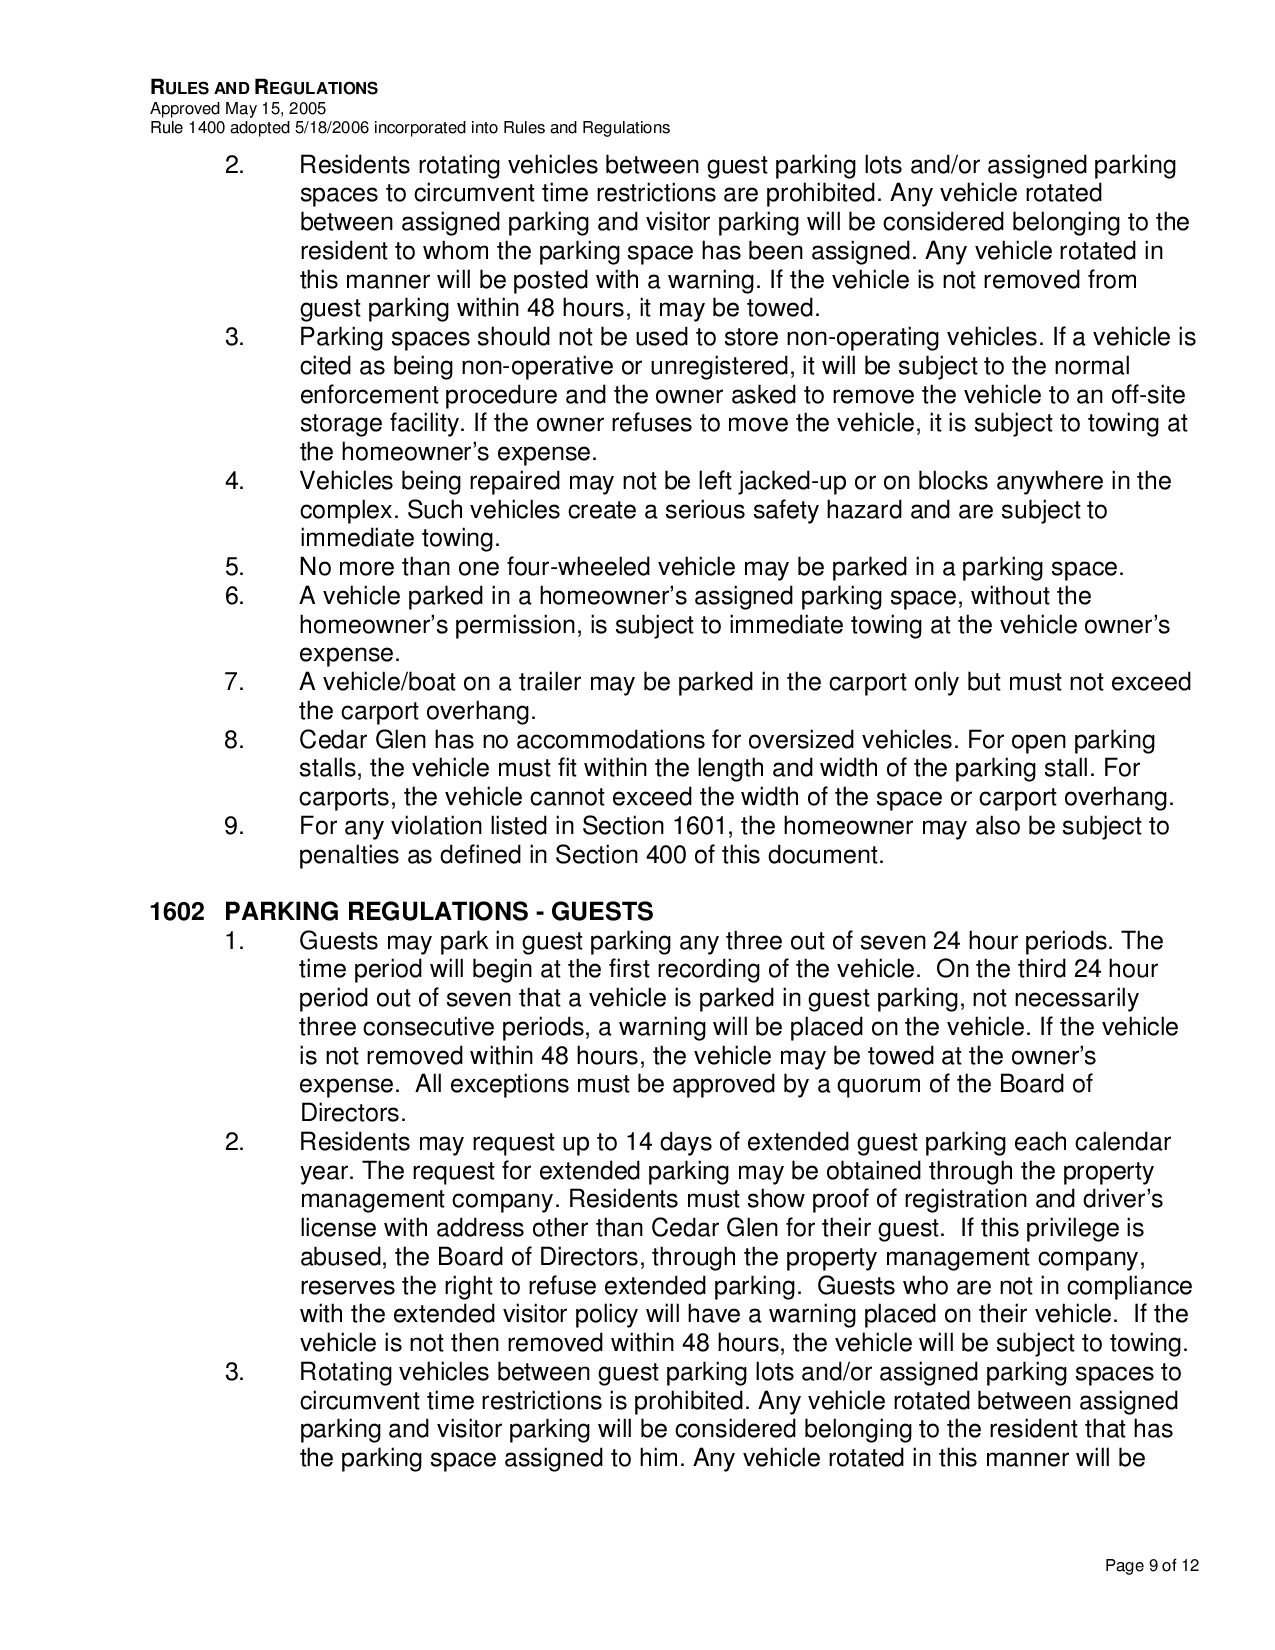 Page 9 of the HOA Rules and Regulations